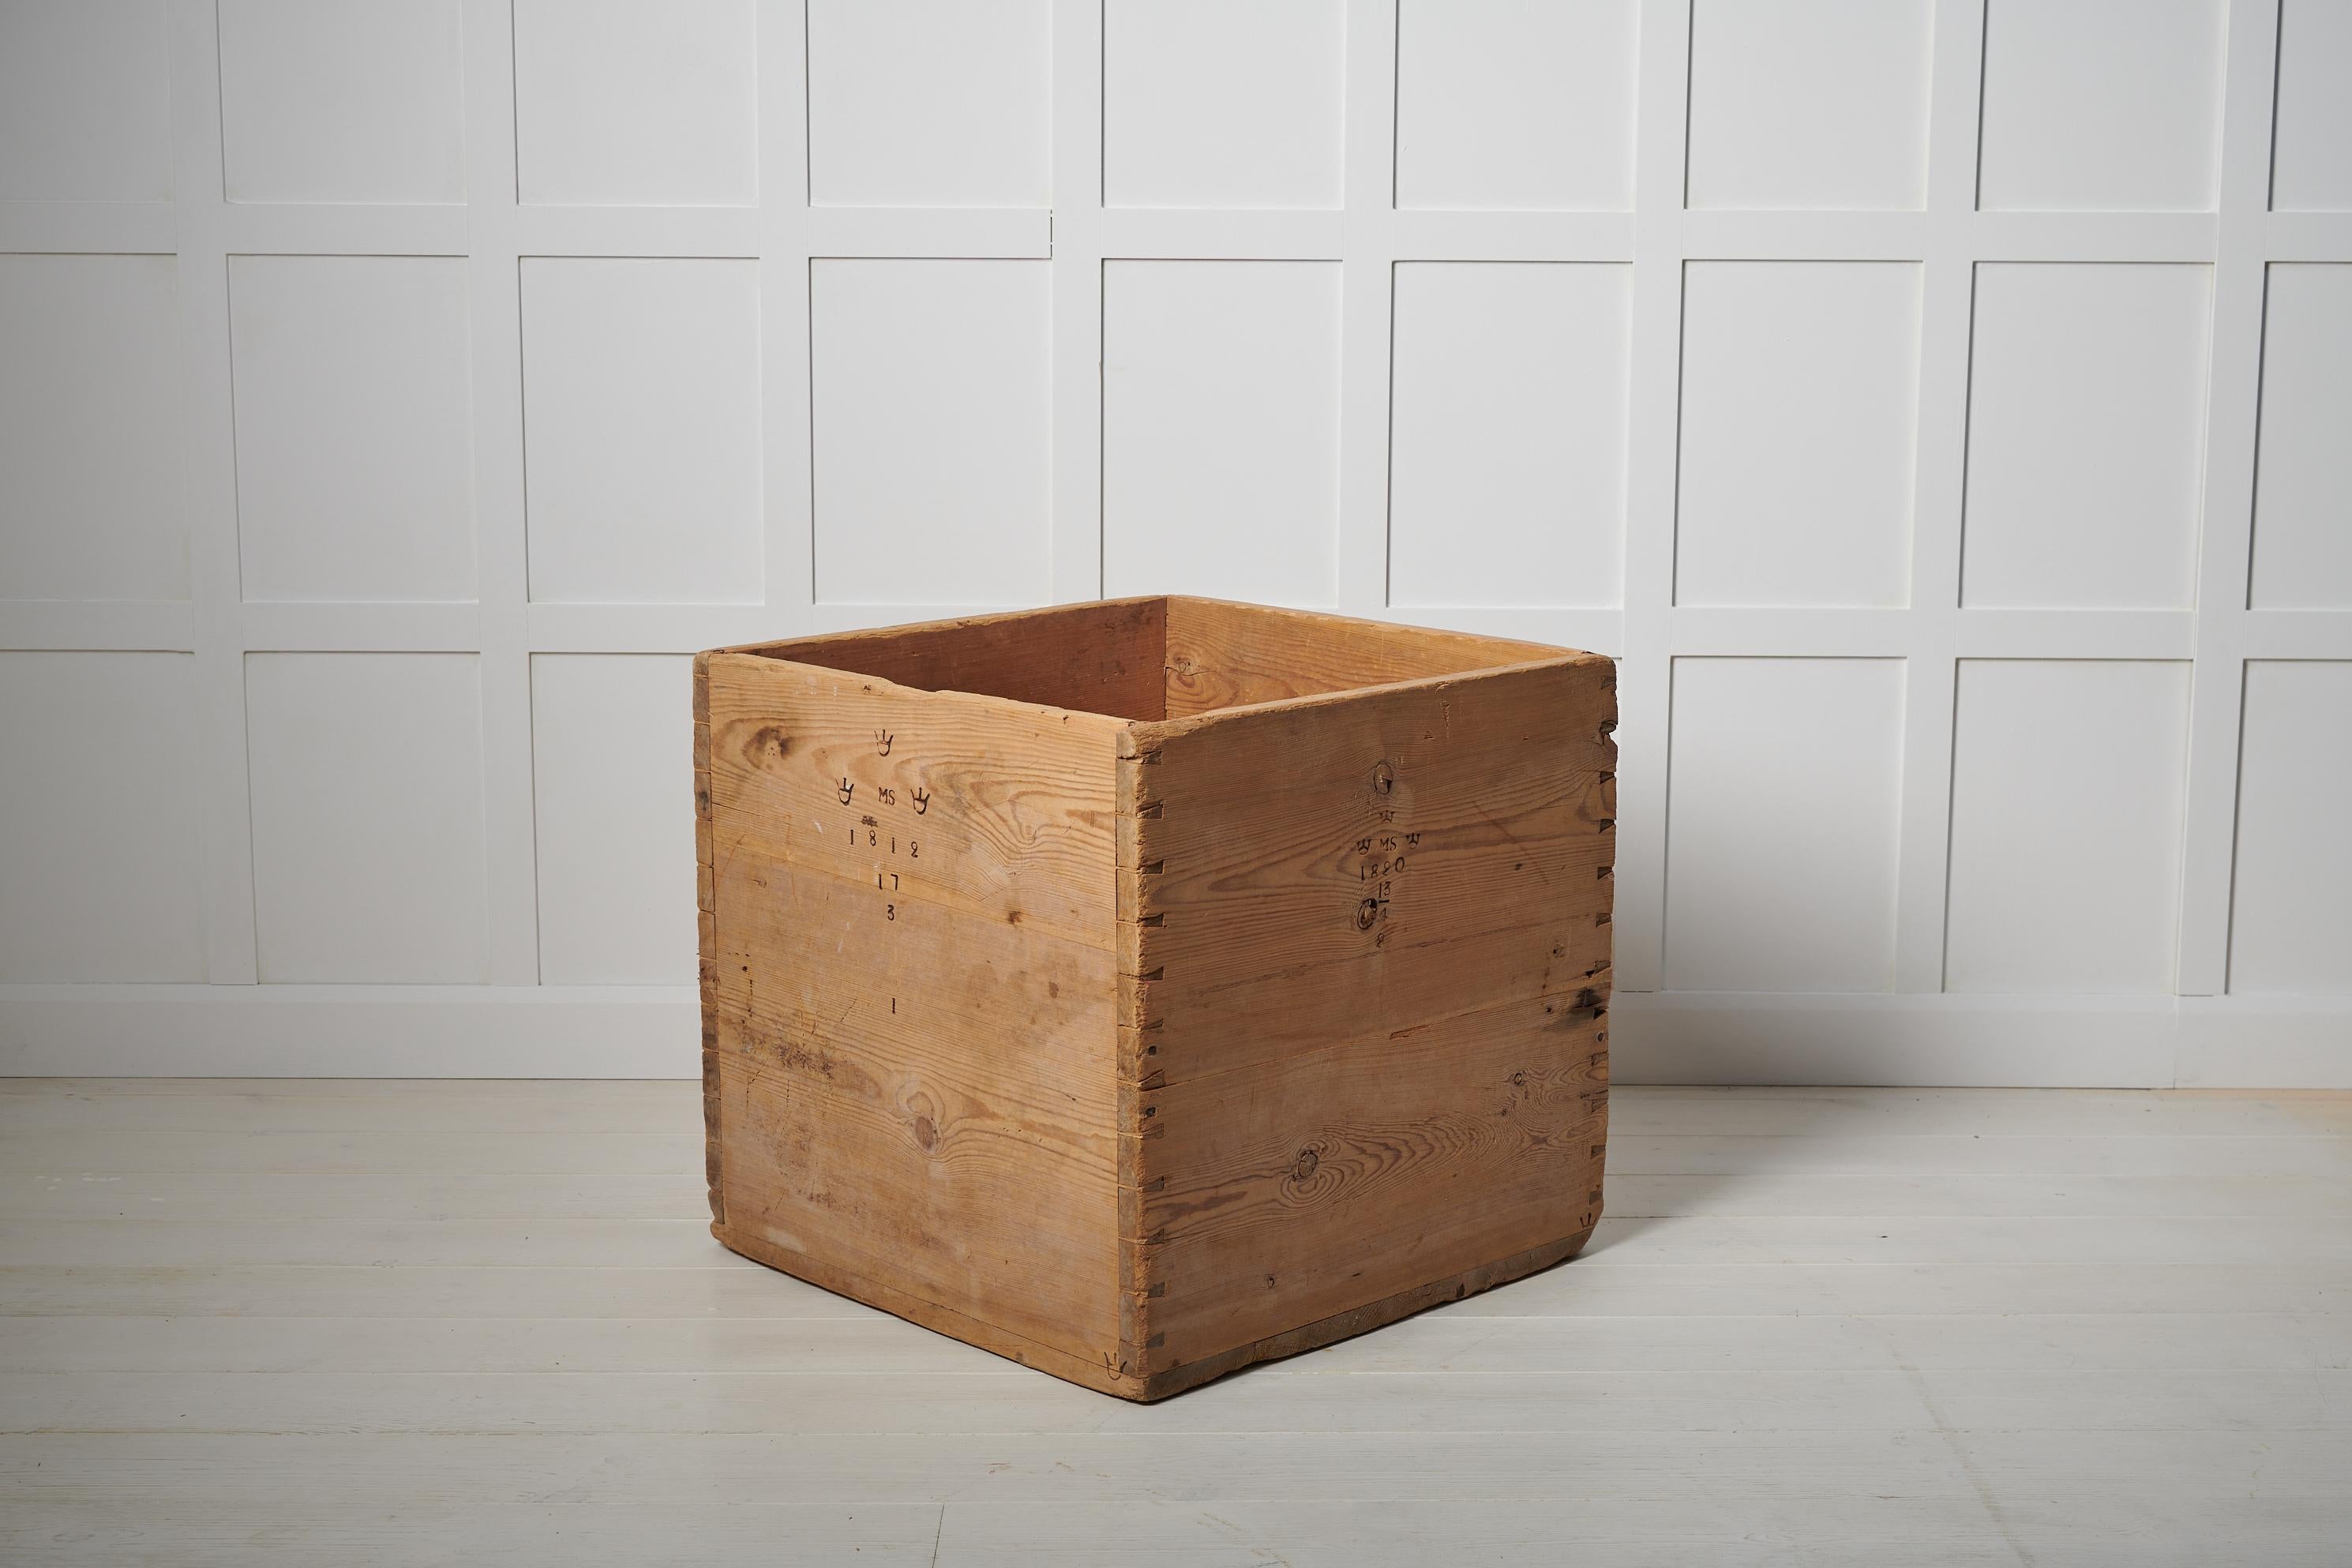 Large antique pine box in folk art from Sweden. The box is a measurement to measure volume and is made by hand in pine. It has never been painted and is marked with the tree crowns as well as years from 1812 to 1843 on all sides. Each mark is a